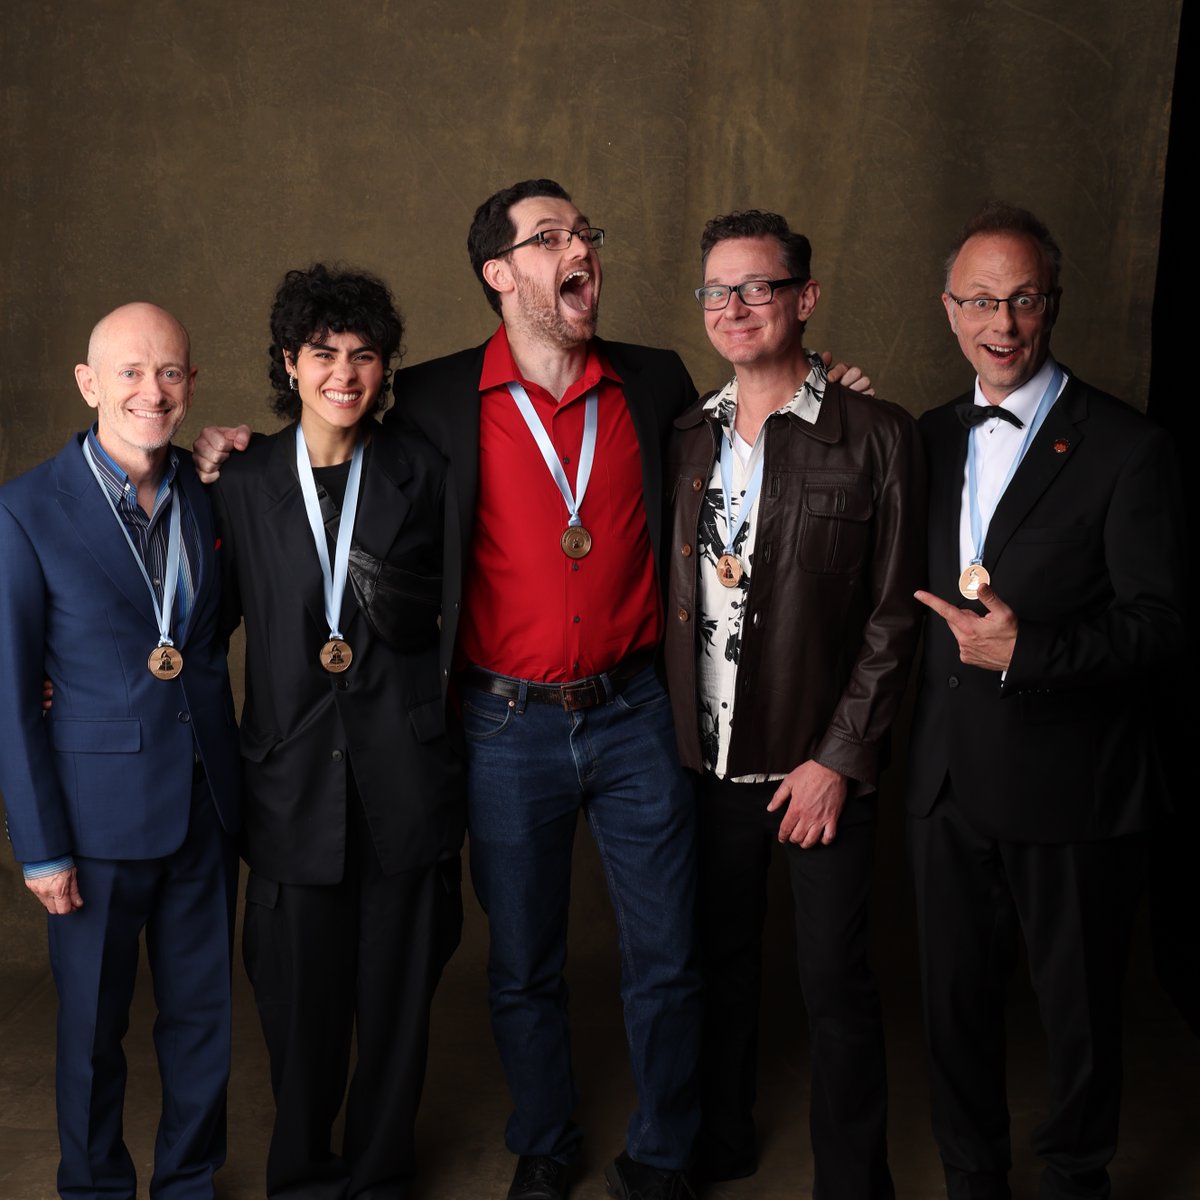 Look we didn't win a Grammy, but we did get to wear medals at the end; we destroyed the Death Star of not being nominated. On that, Congrats to @ComposerBarton and @GordyHaab!
@awintory @actualmontaigne @summerfallgames #straygods 
Thanks @ScreenAustralia for getting us over here